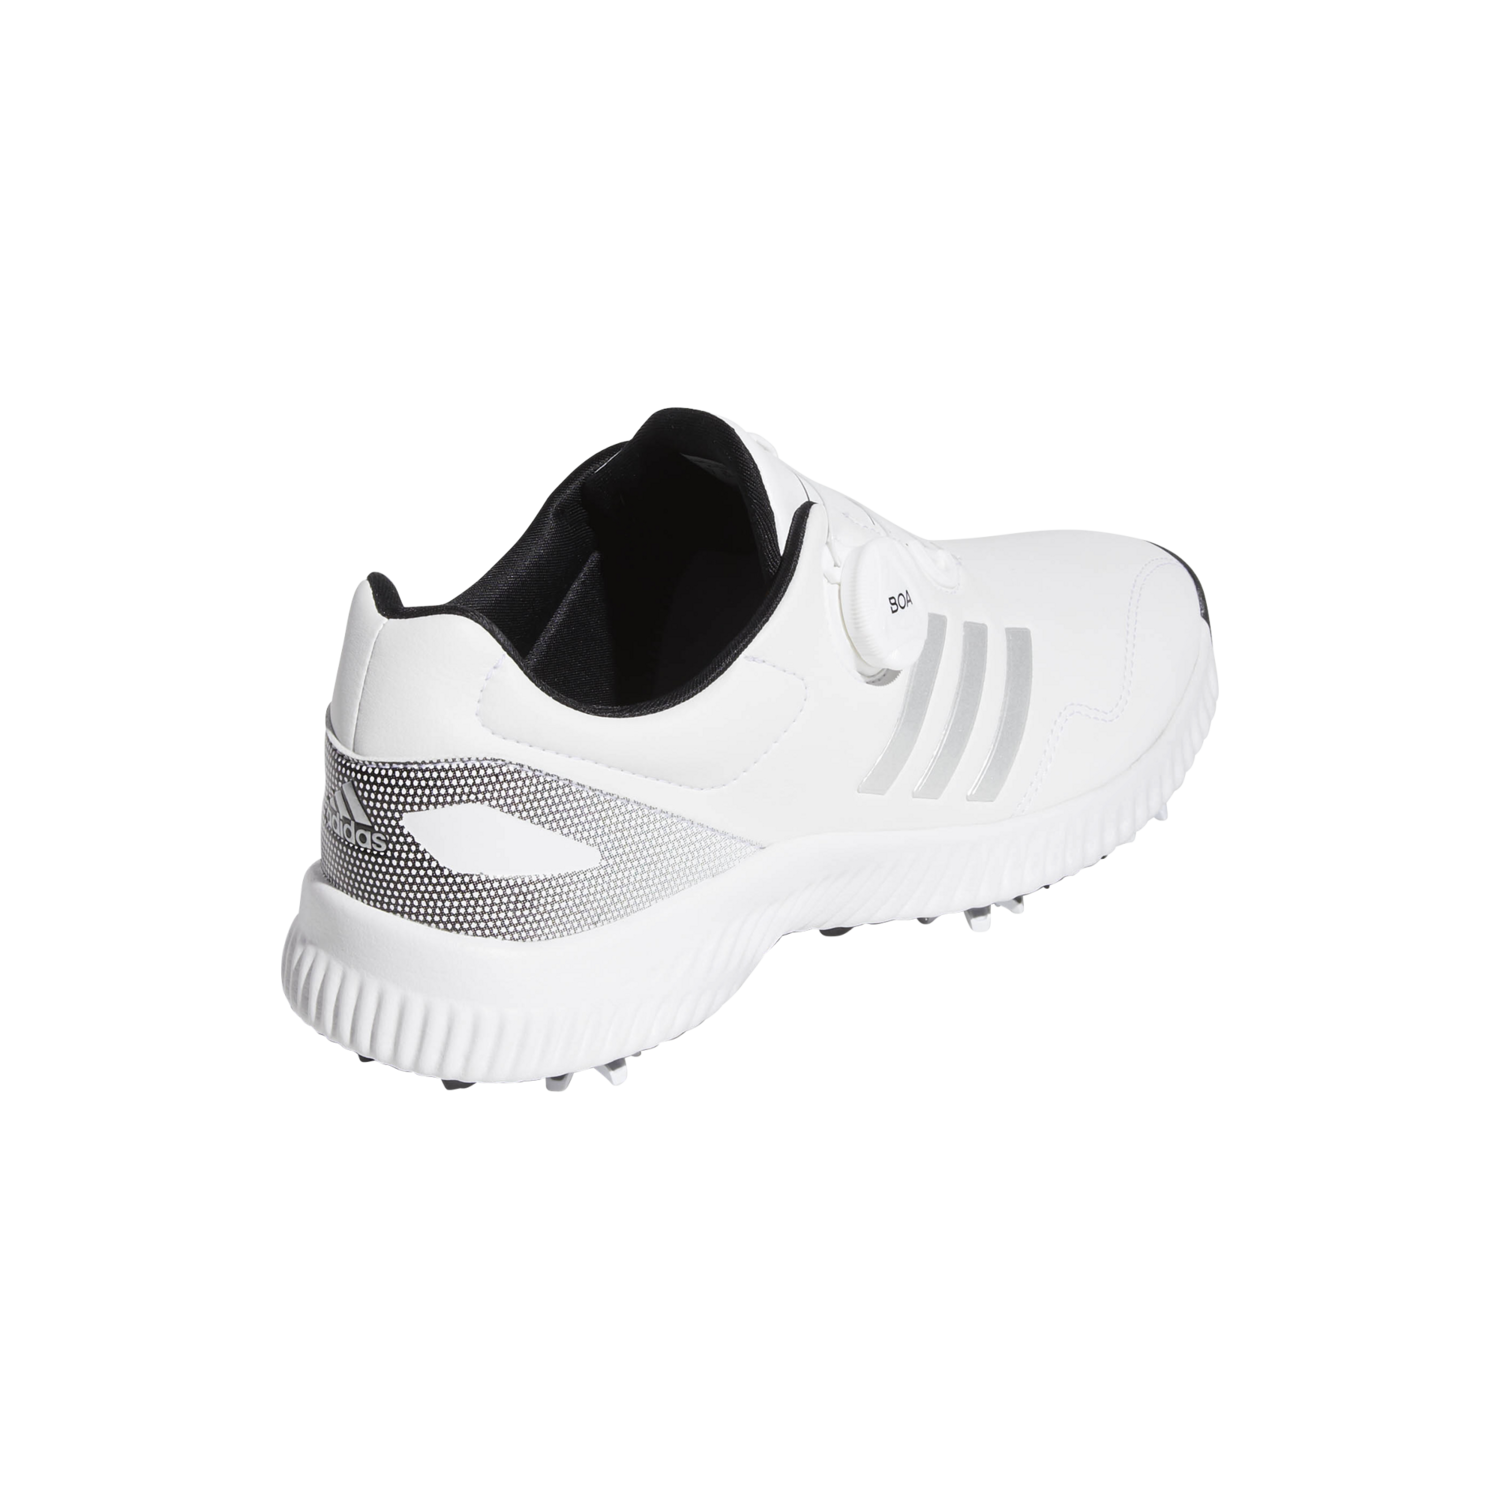 pga superstore women's golf shoes